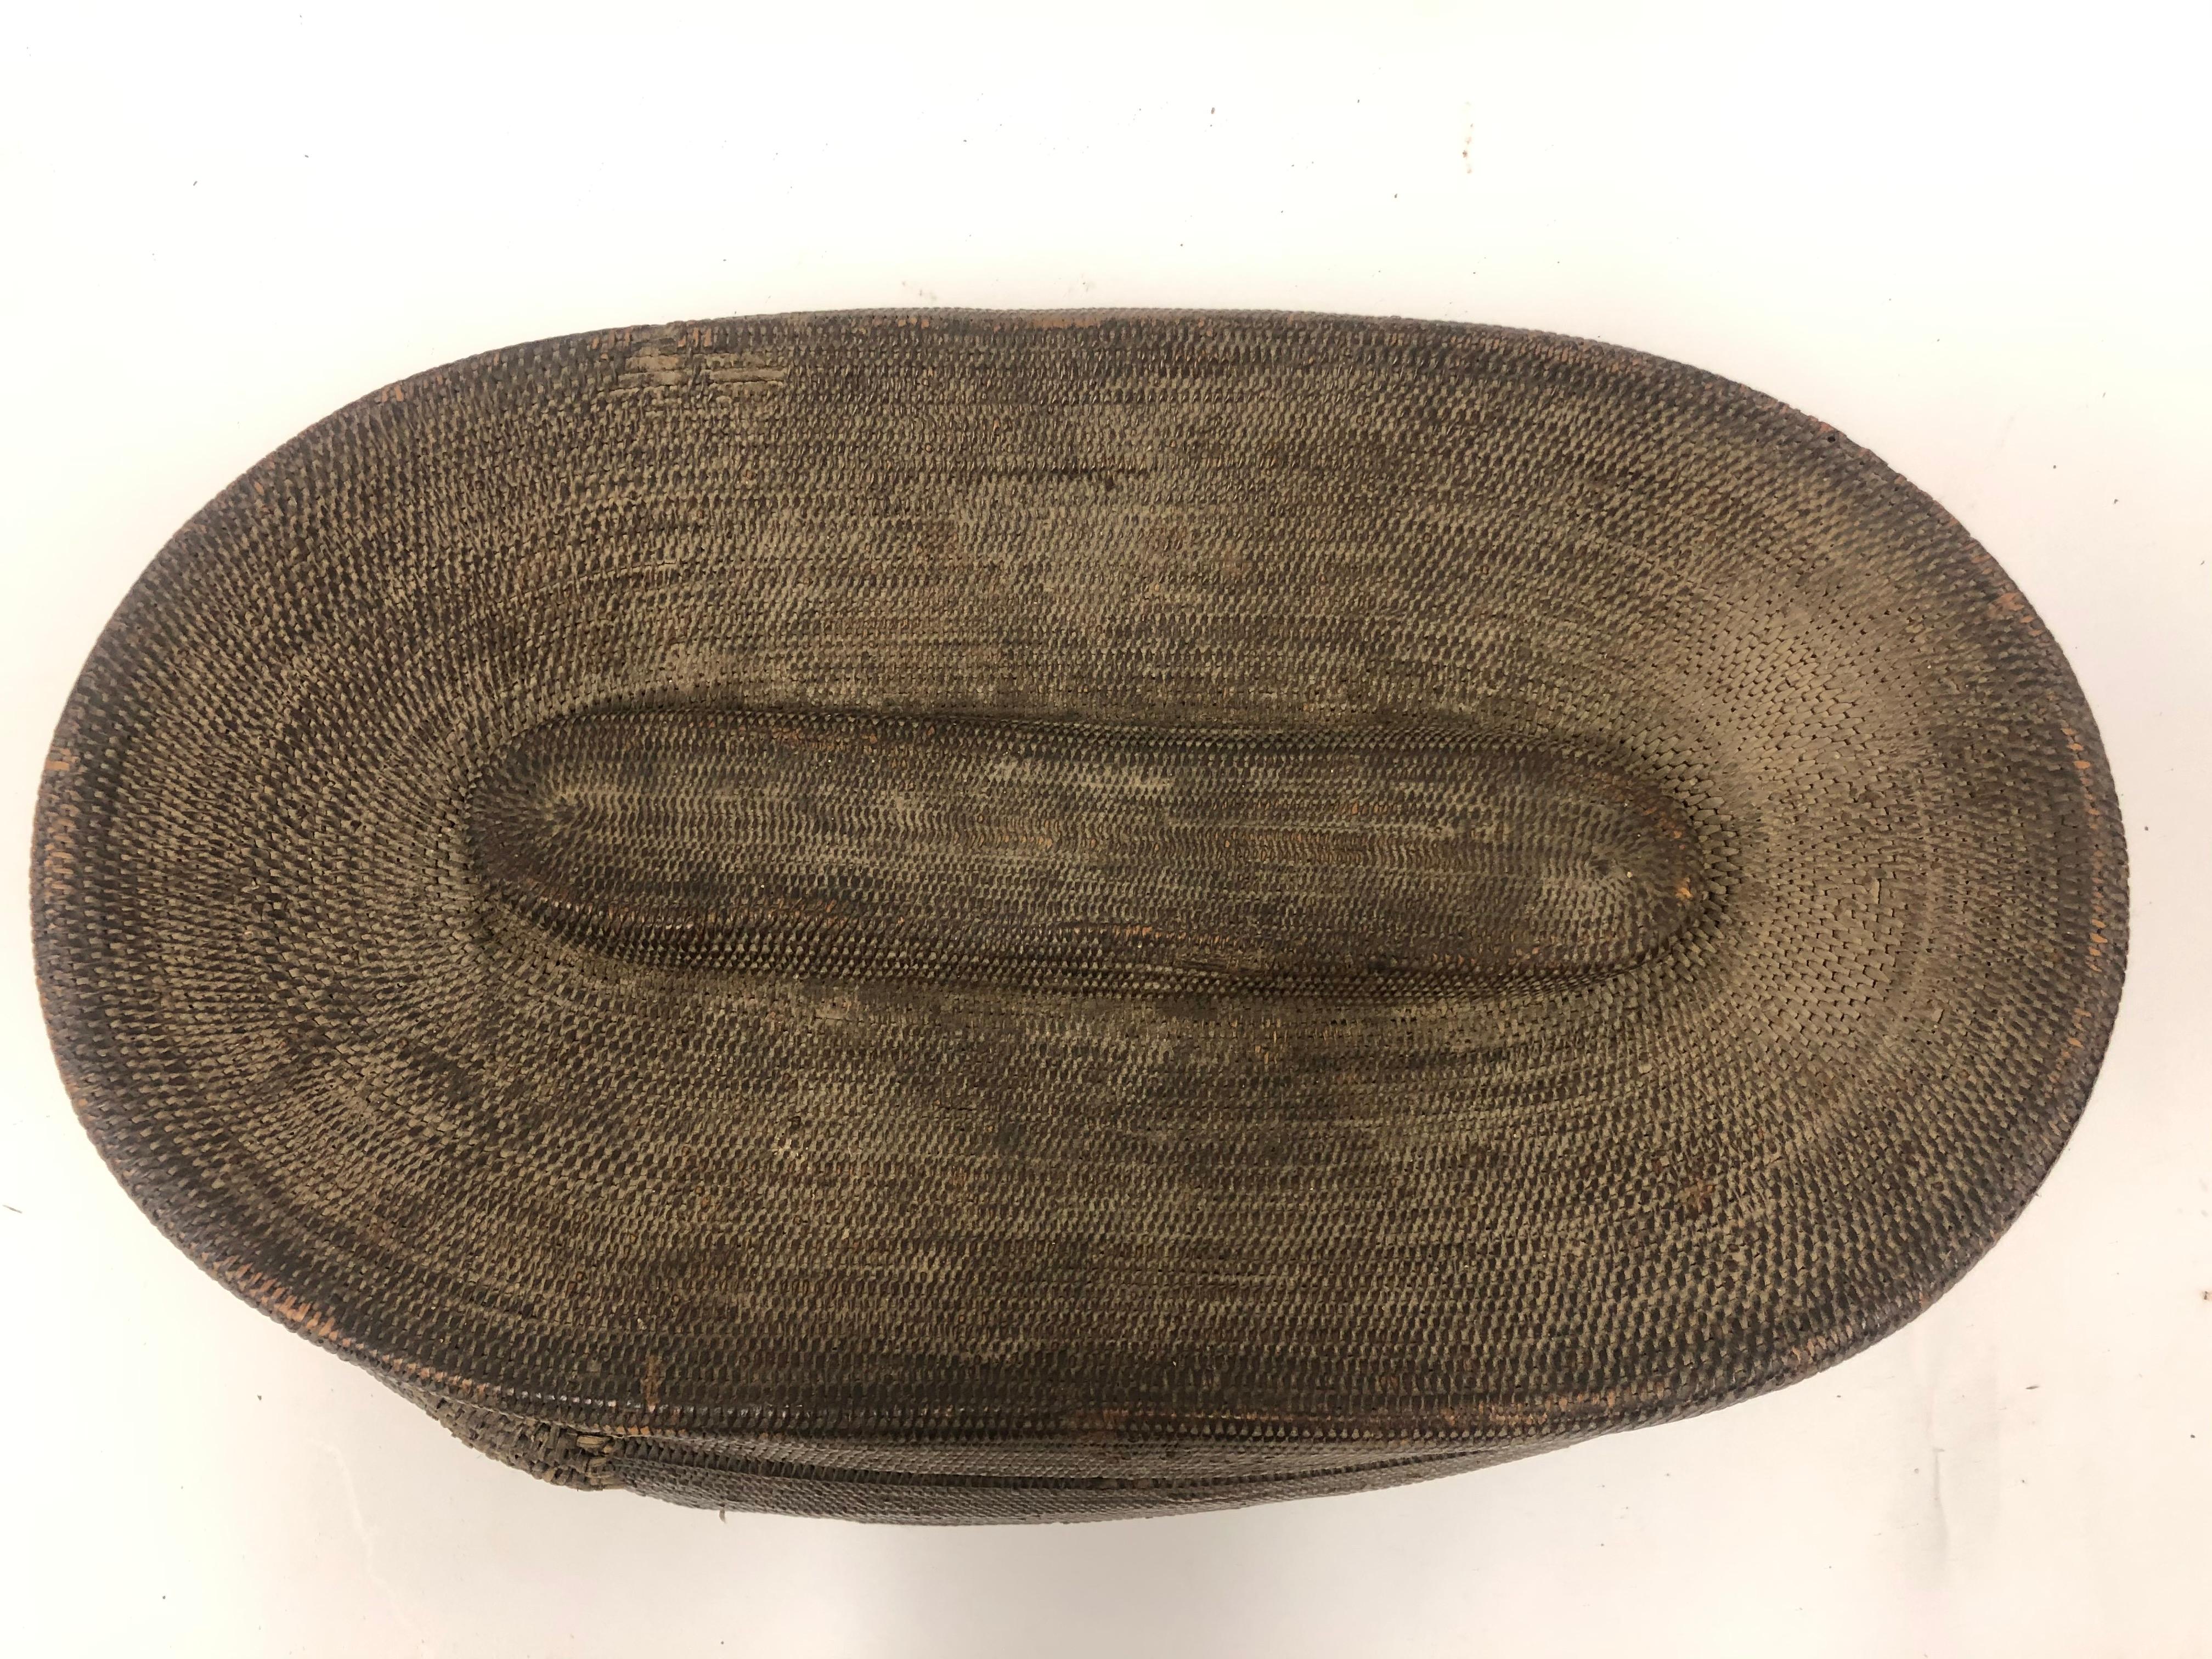 Antique oval basket with lid. Most likely from Africa.

Property from esteemed interior designer Juan Montoya. Juan Montoya is one of the most acclaimed and prolific interior designers in the world today. Juan Montoya was born and spent his early